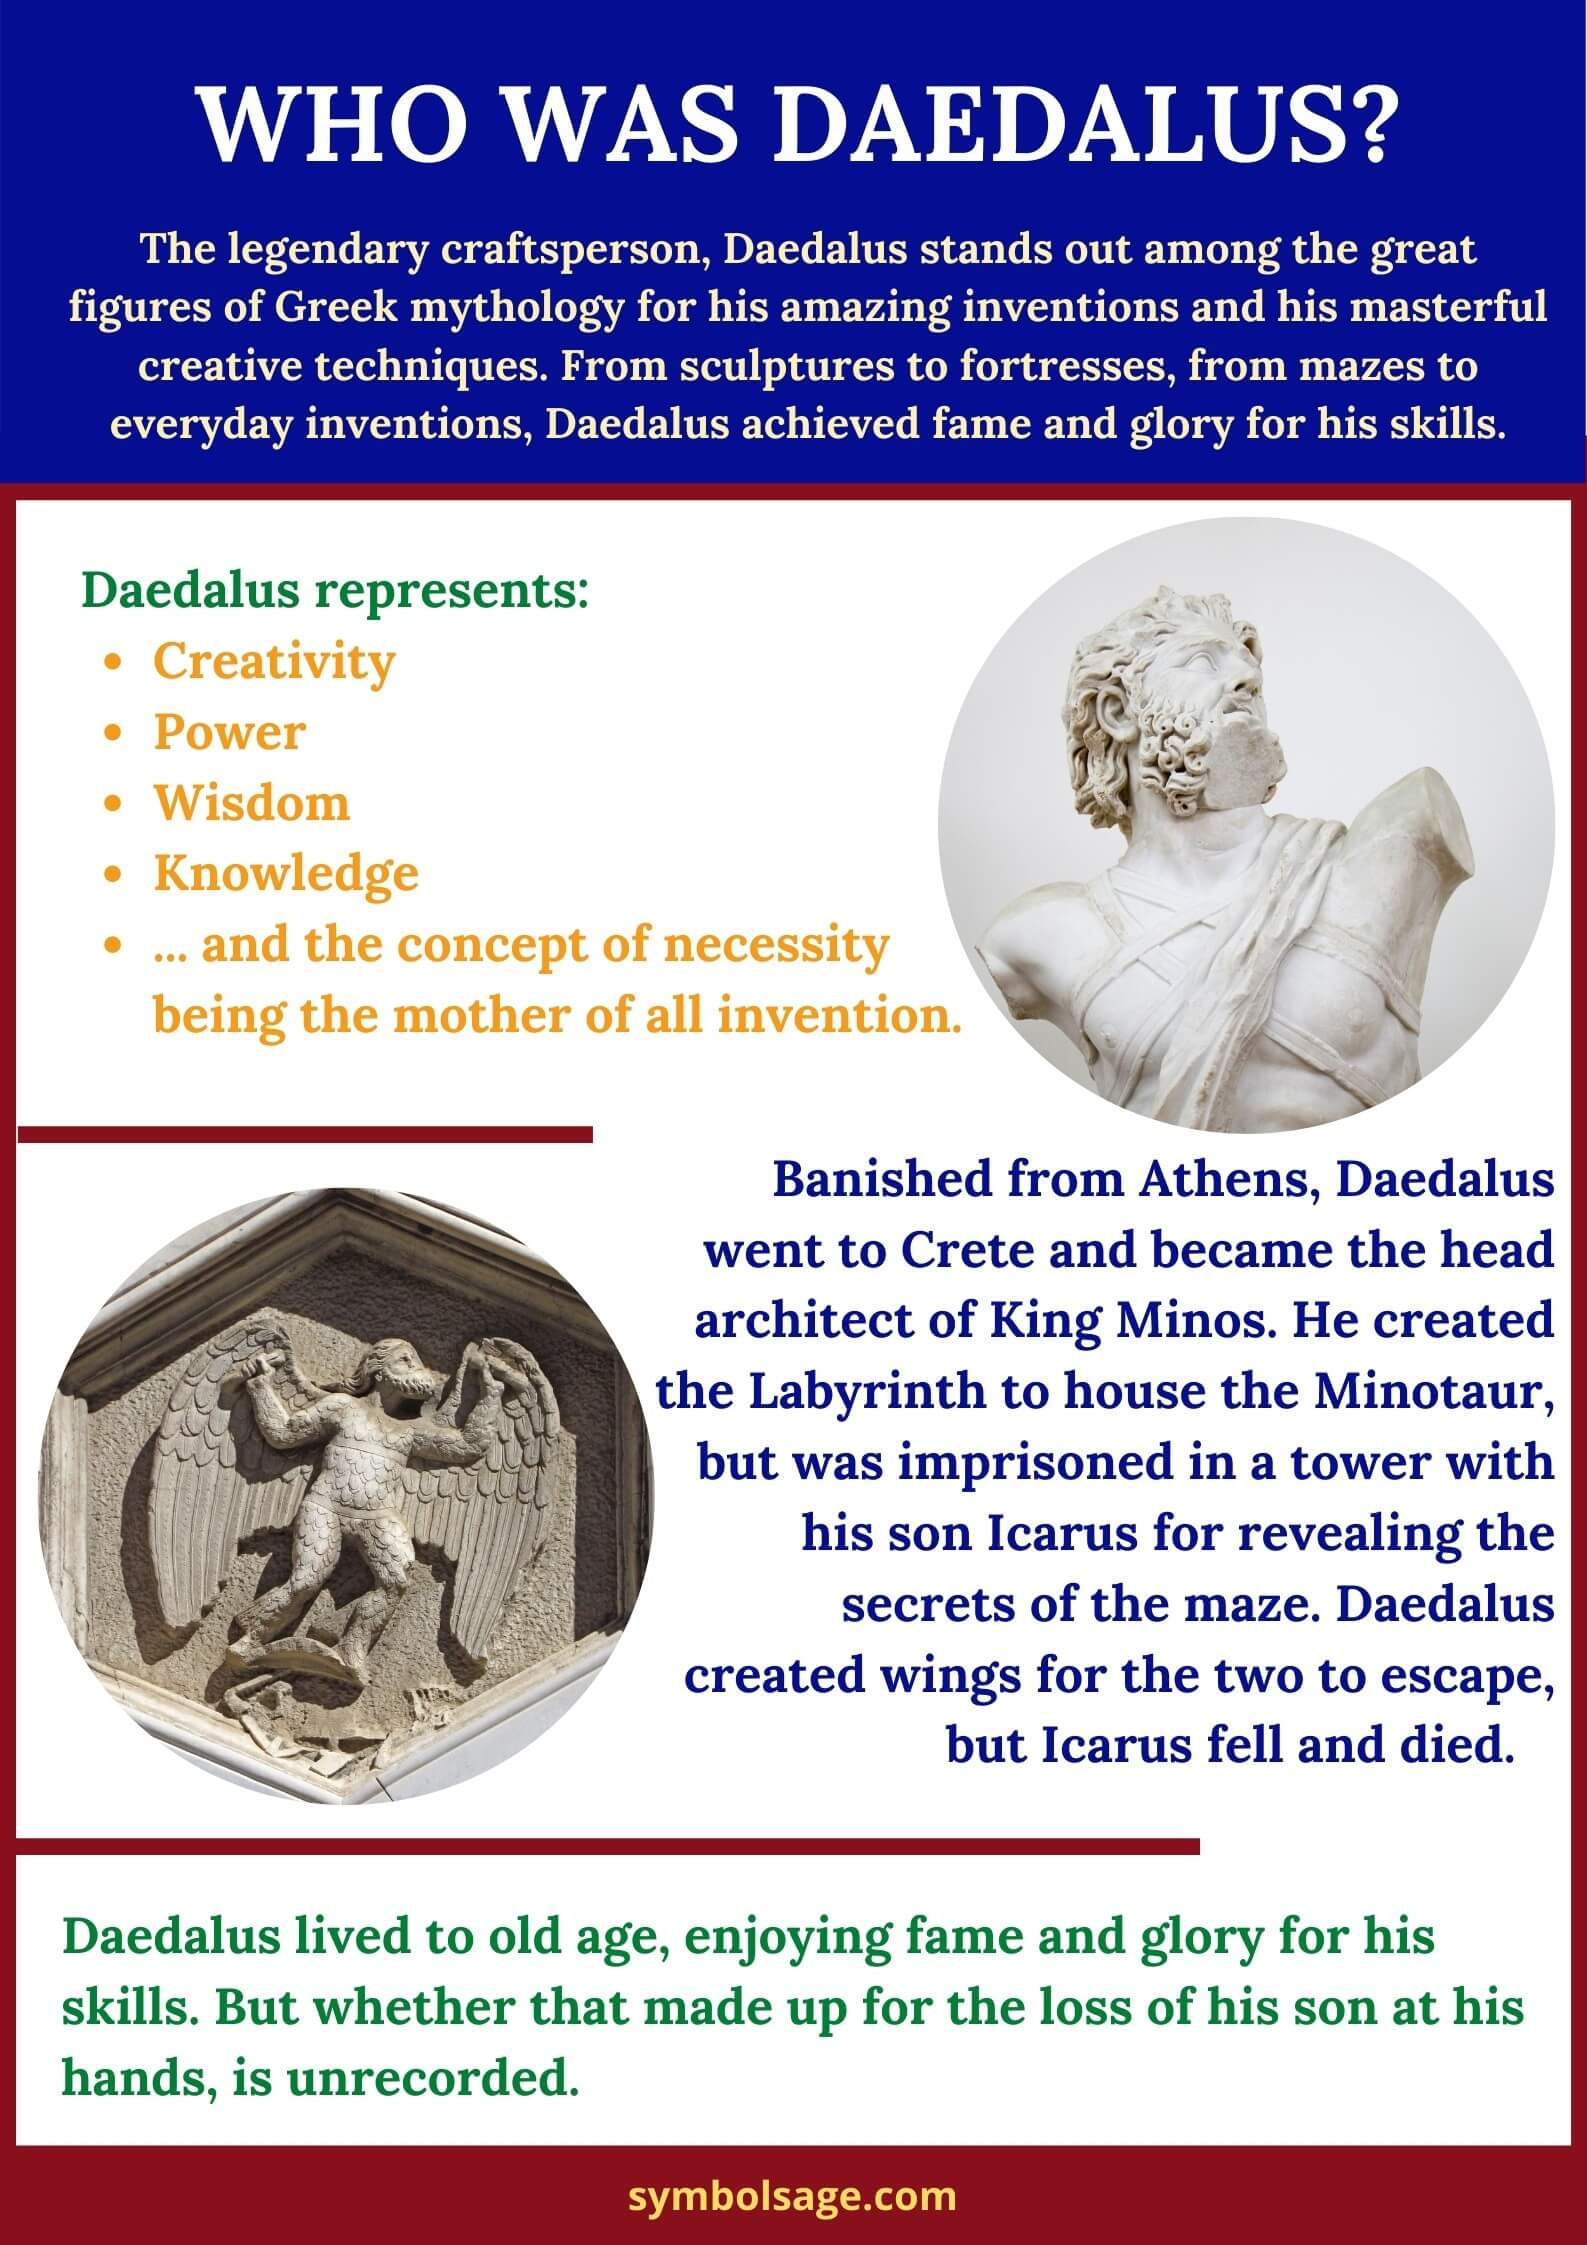 Who was Daedalus